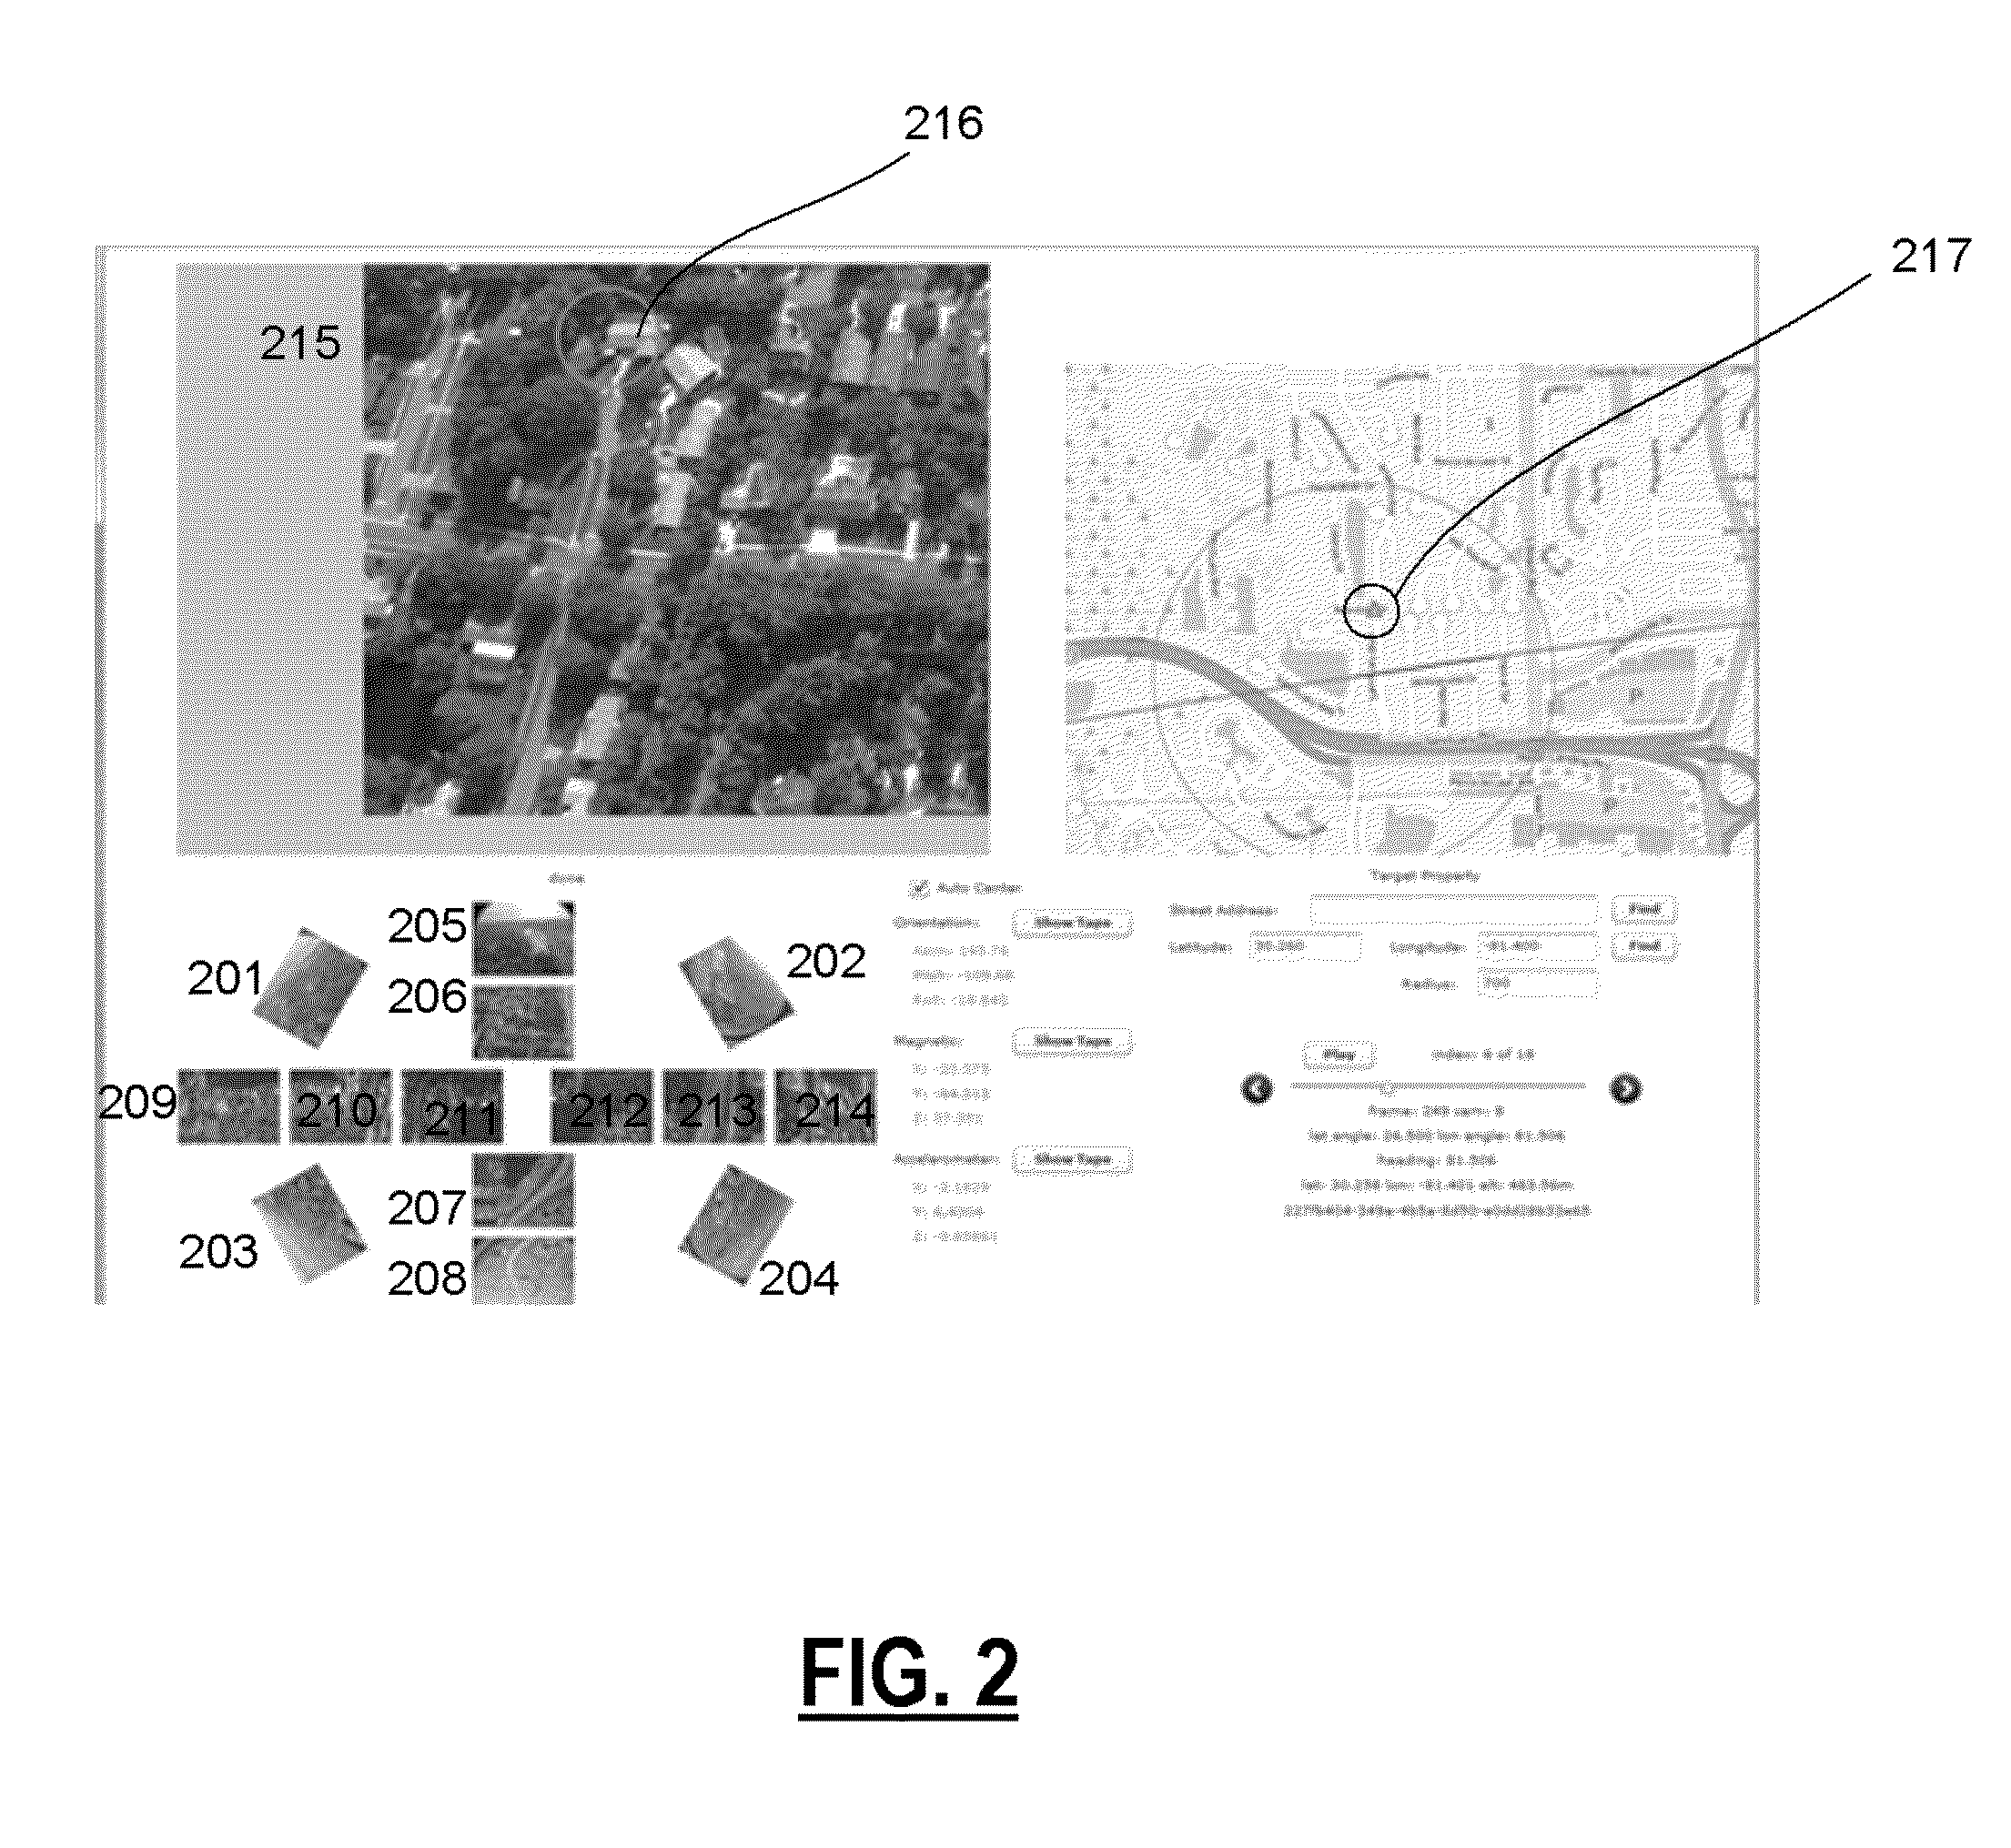 Method and Apparatus for Processing Aerial Imagery with Camera Location and Orientation for Simulating Smooth Video Flyby